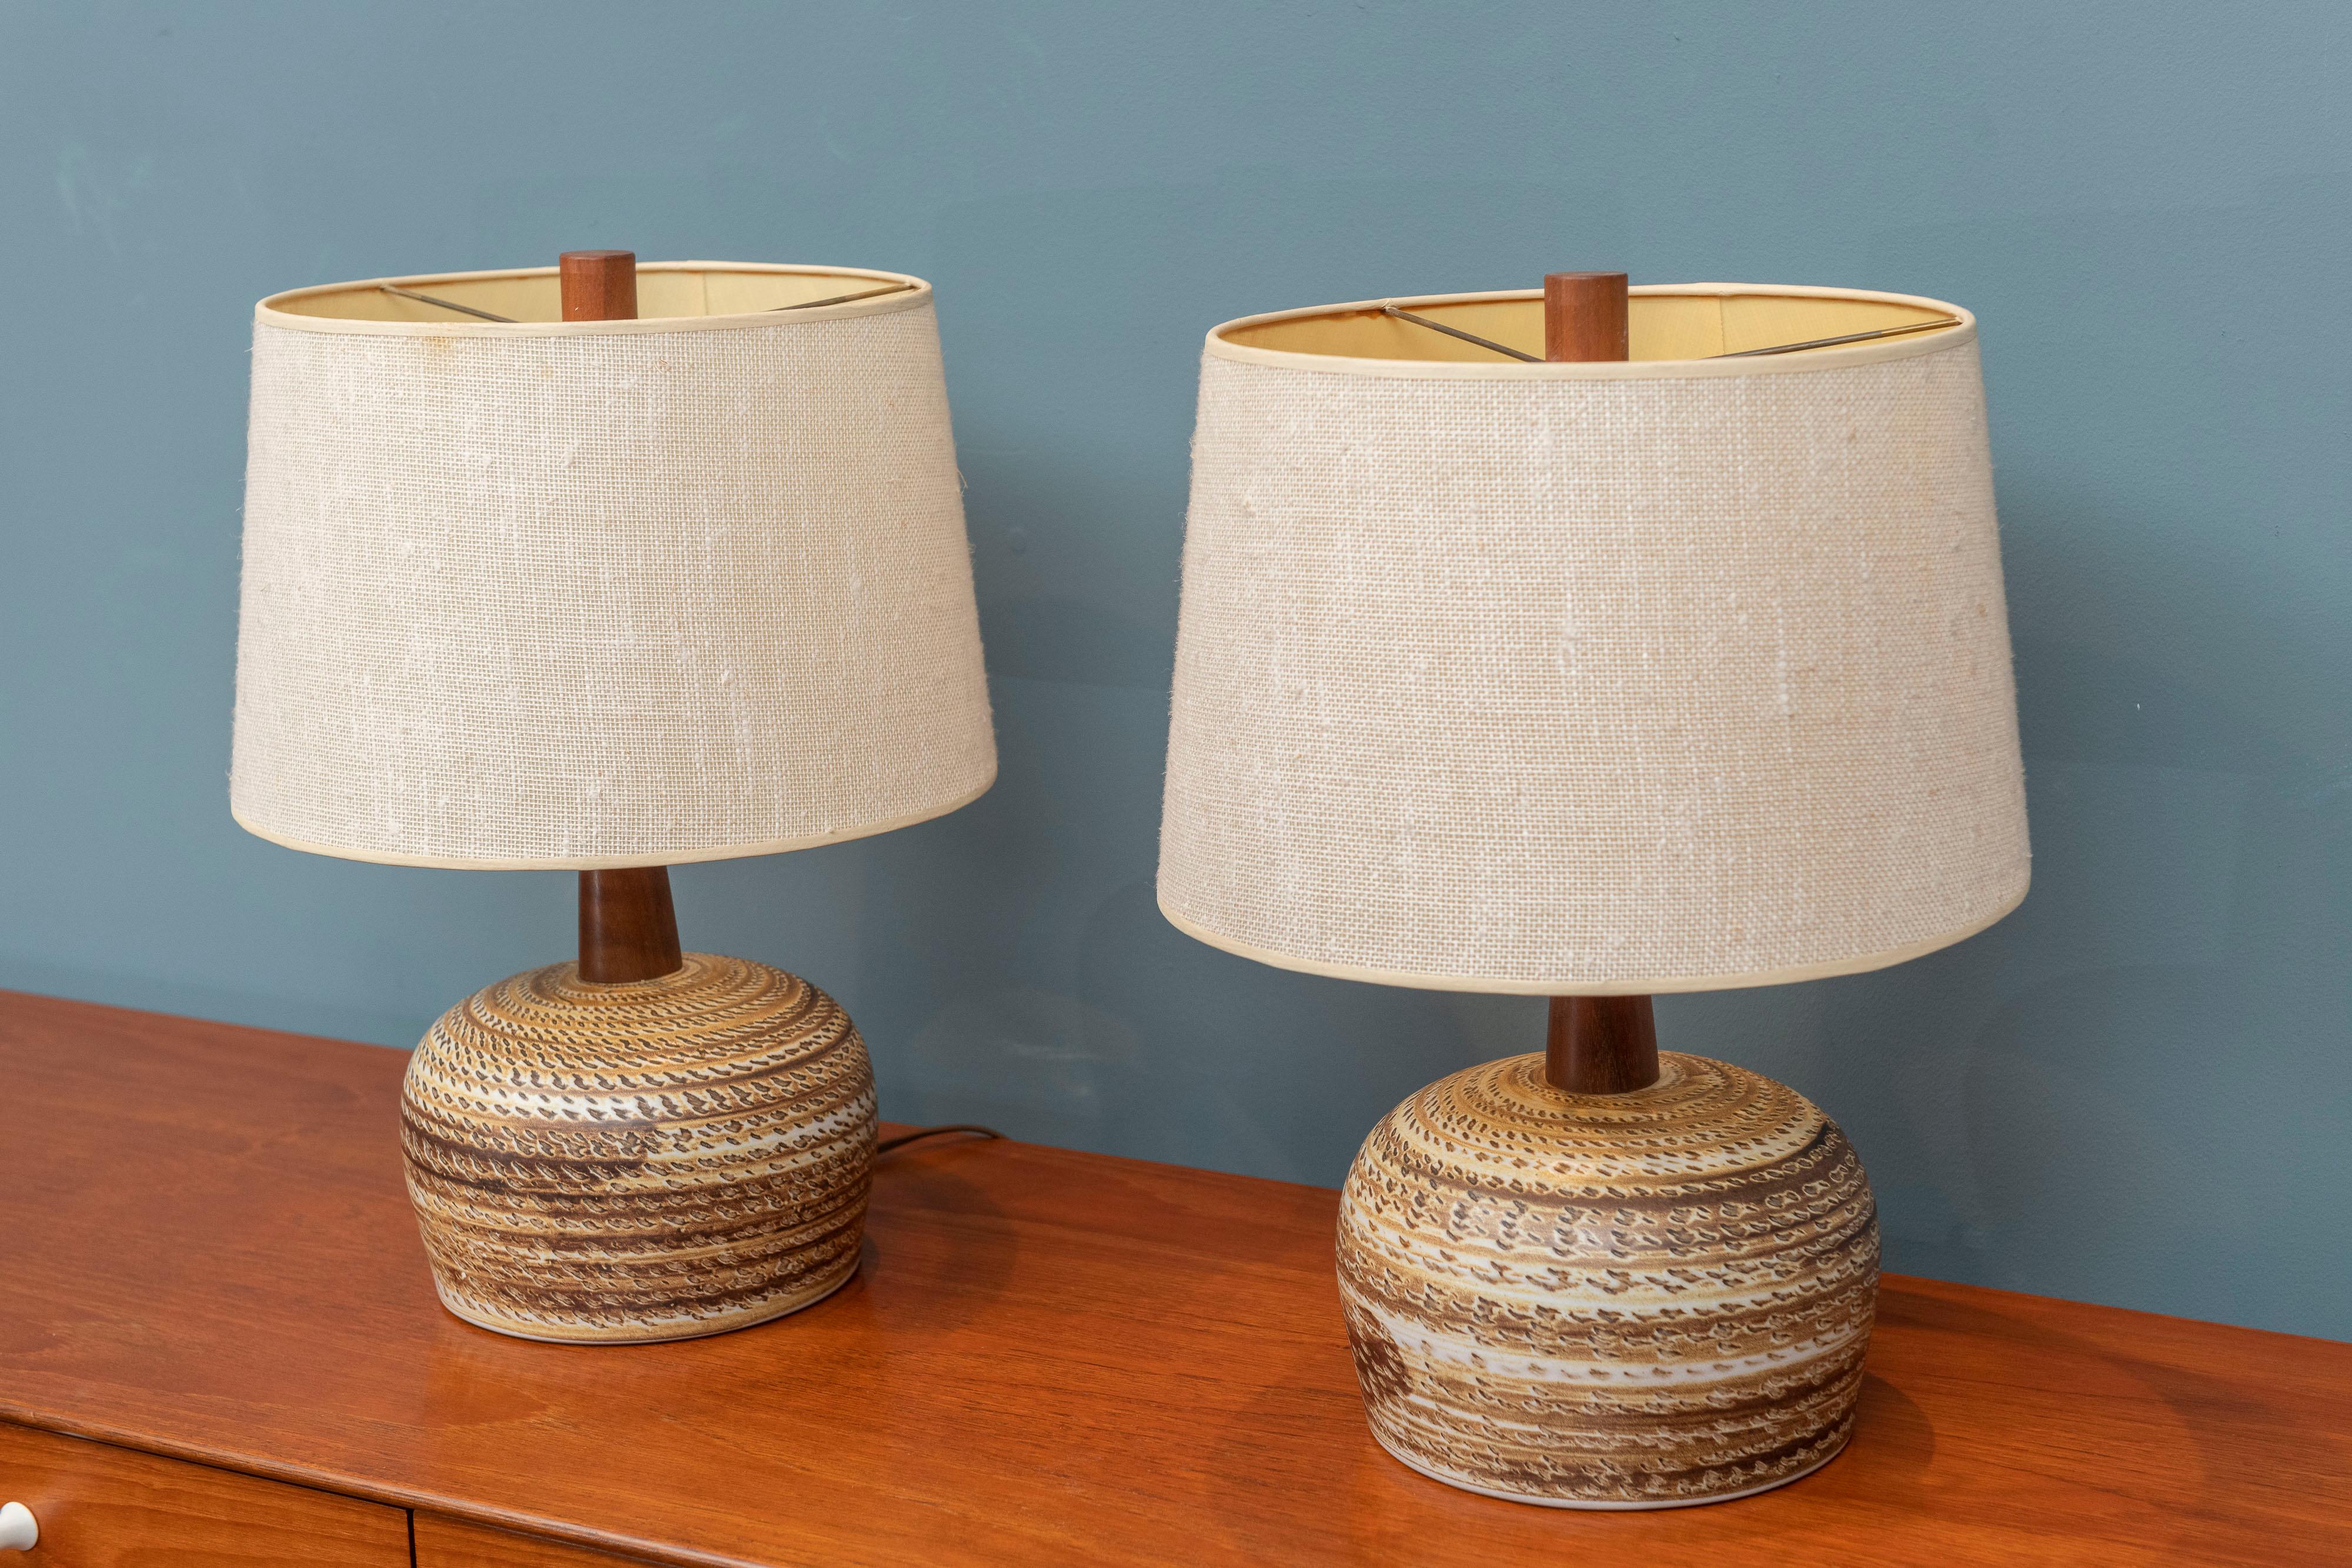 Gordon & Jane Martz design table lamps for Marshall Studios. Made with an artistic dome form ceramic body, teak necks, original shades and finials. Signed on the lower rear and ready to install.